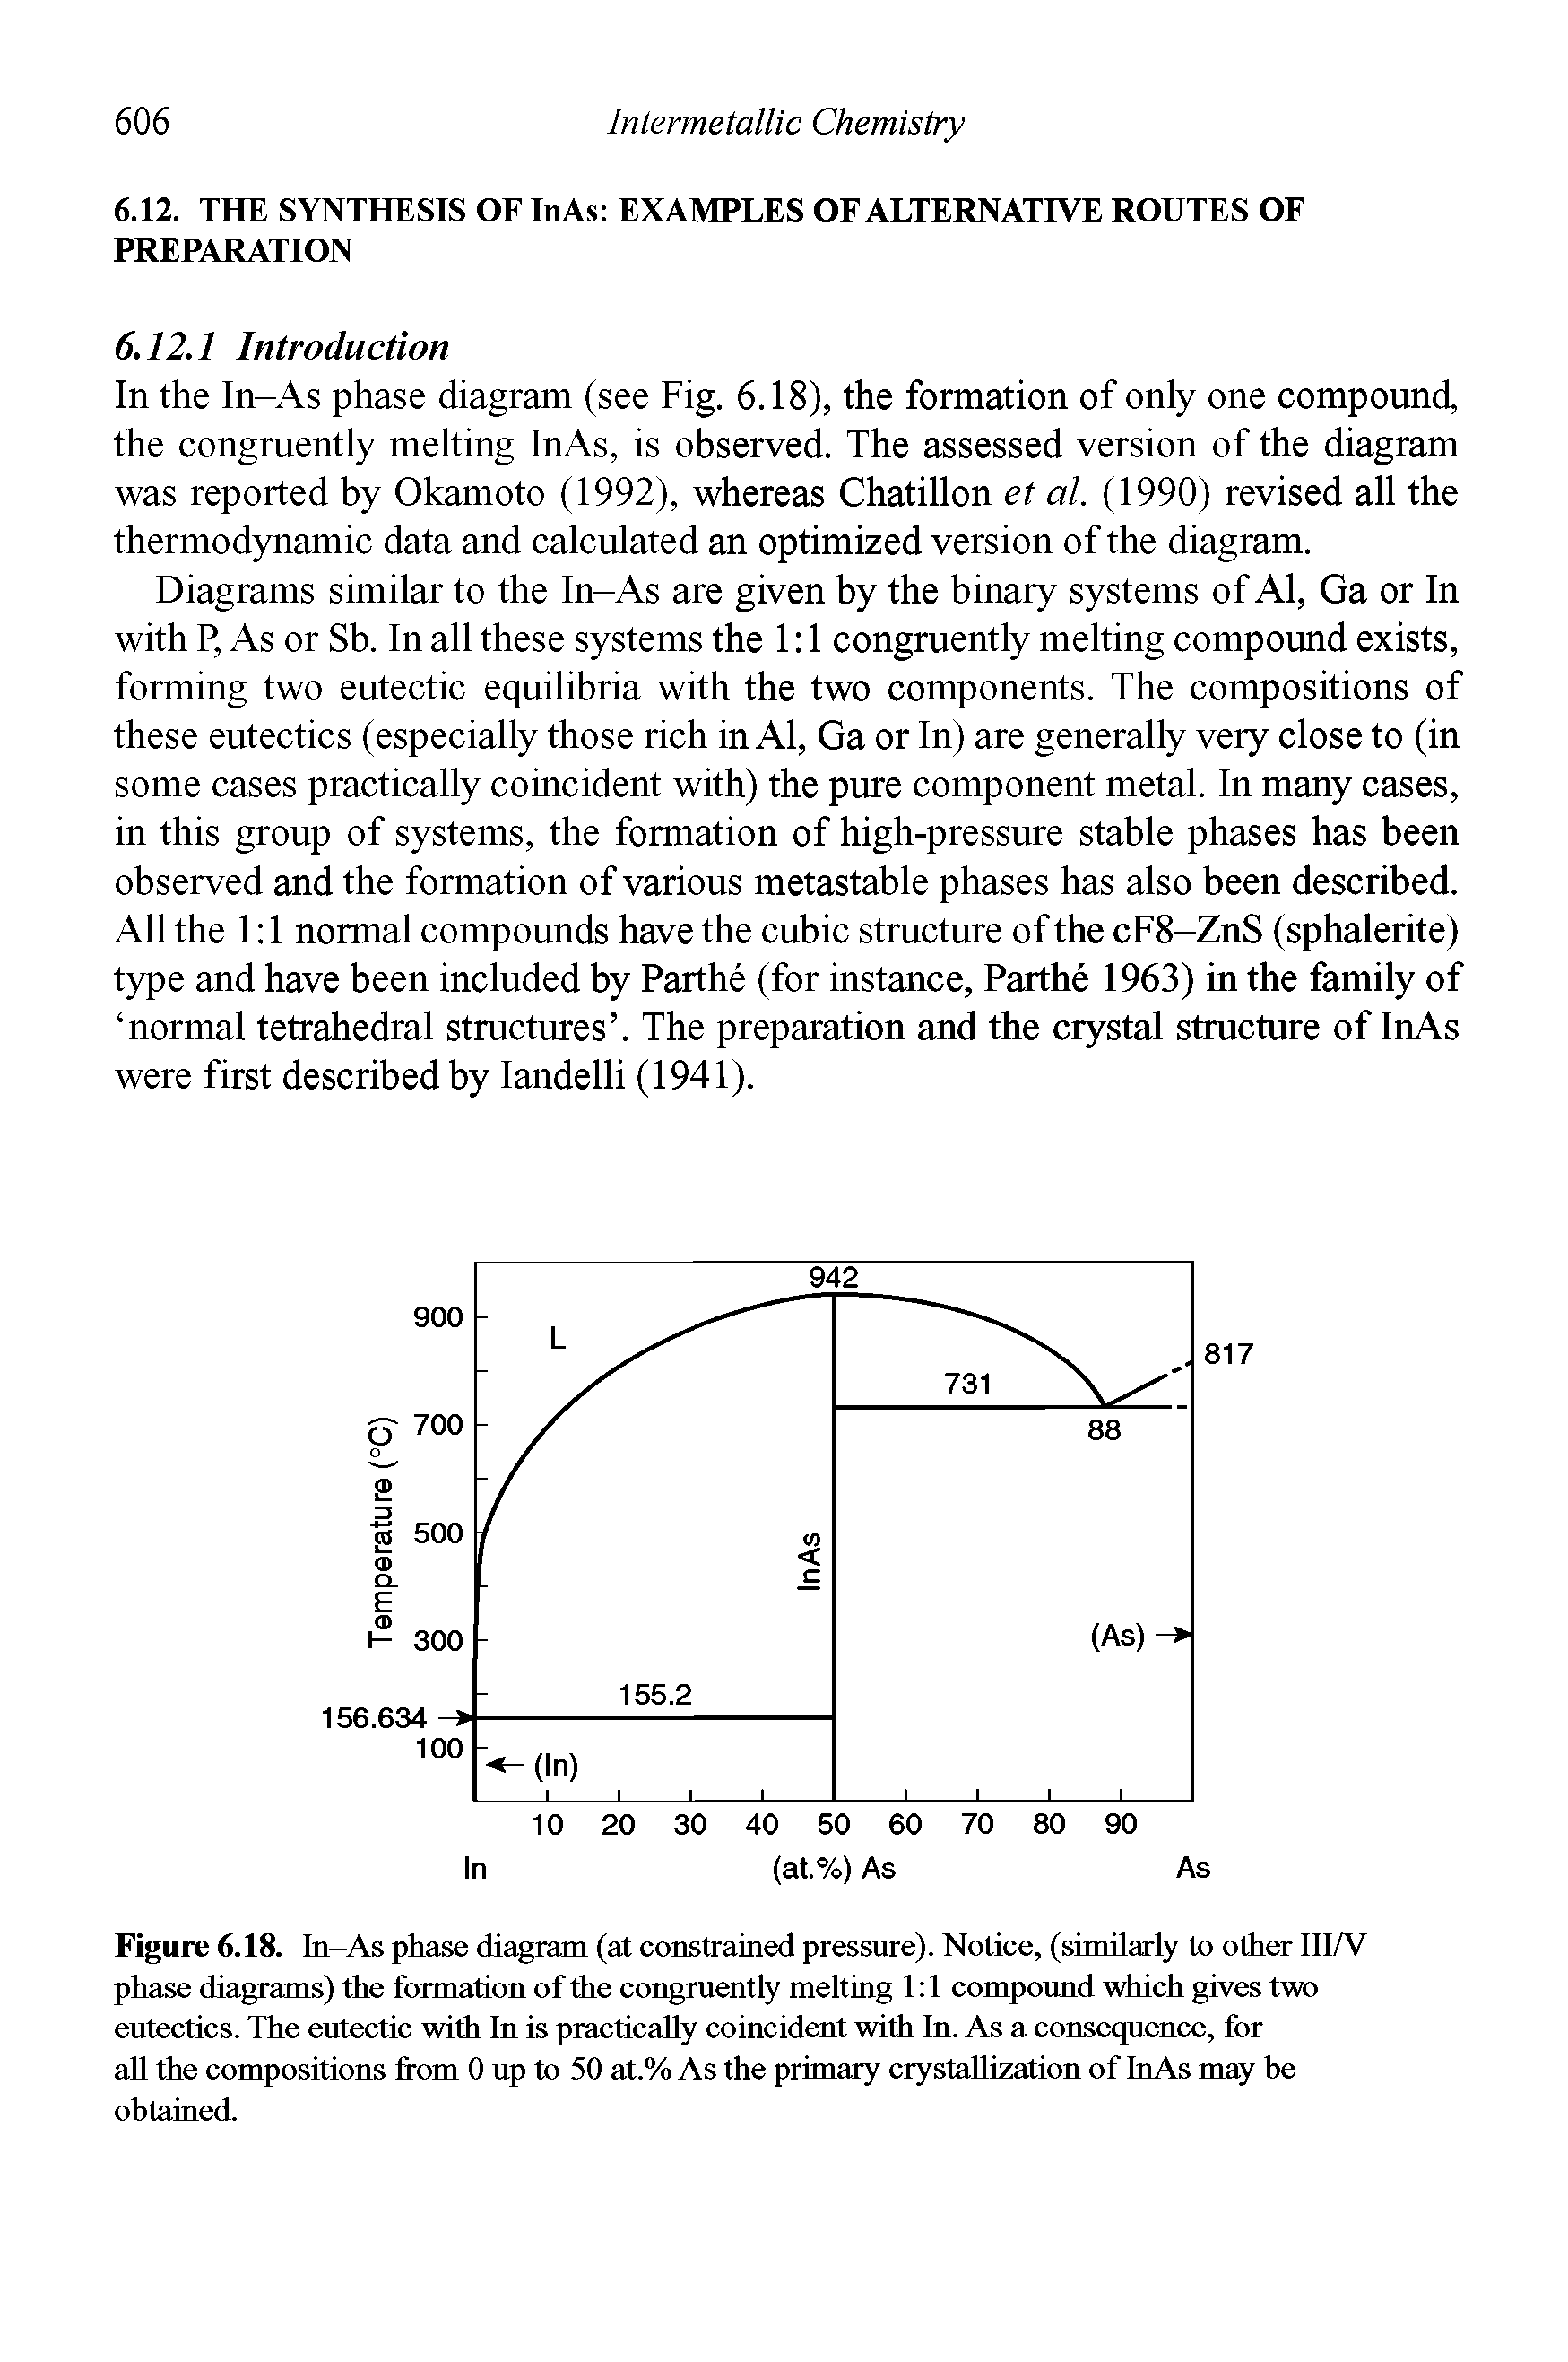 Figure 6.18. In-As phase diagram (at constrained pressure). Notice, (similarly to other III/V phase diagrams) the formation of the congruently melting 1 1 compound which gives two eutectics. The eutectic with In is practically coincident with In. As a consequence, for all the compositions from 0 up to 50 at.% As the primary crystallization of InAs may he obtained.